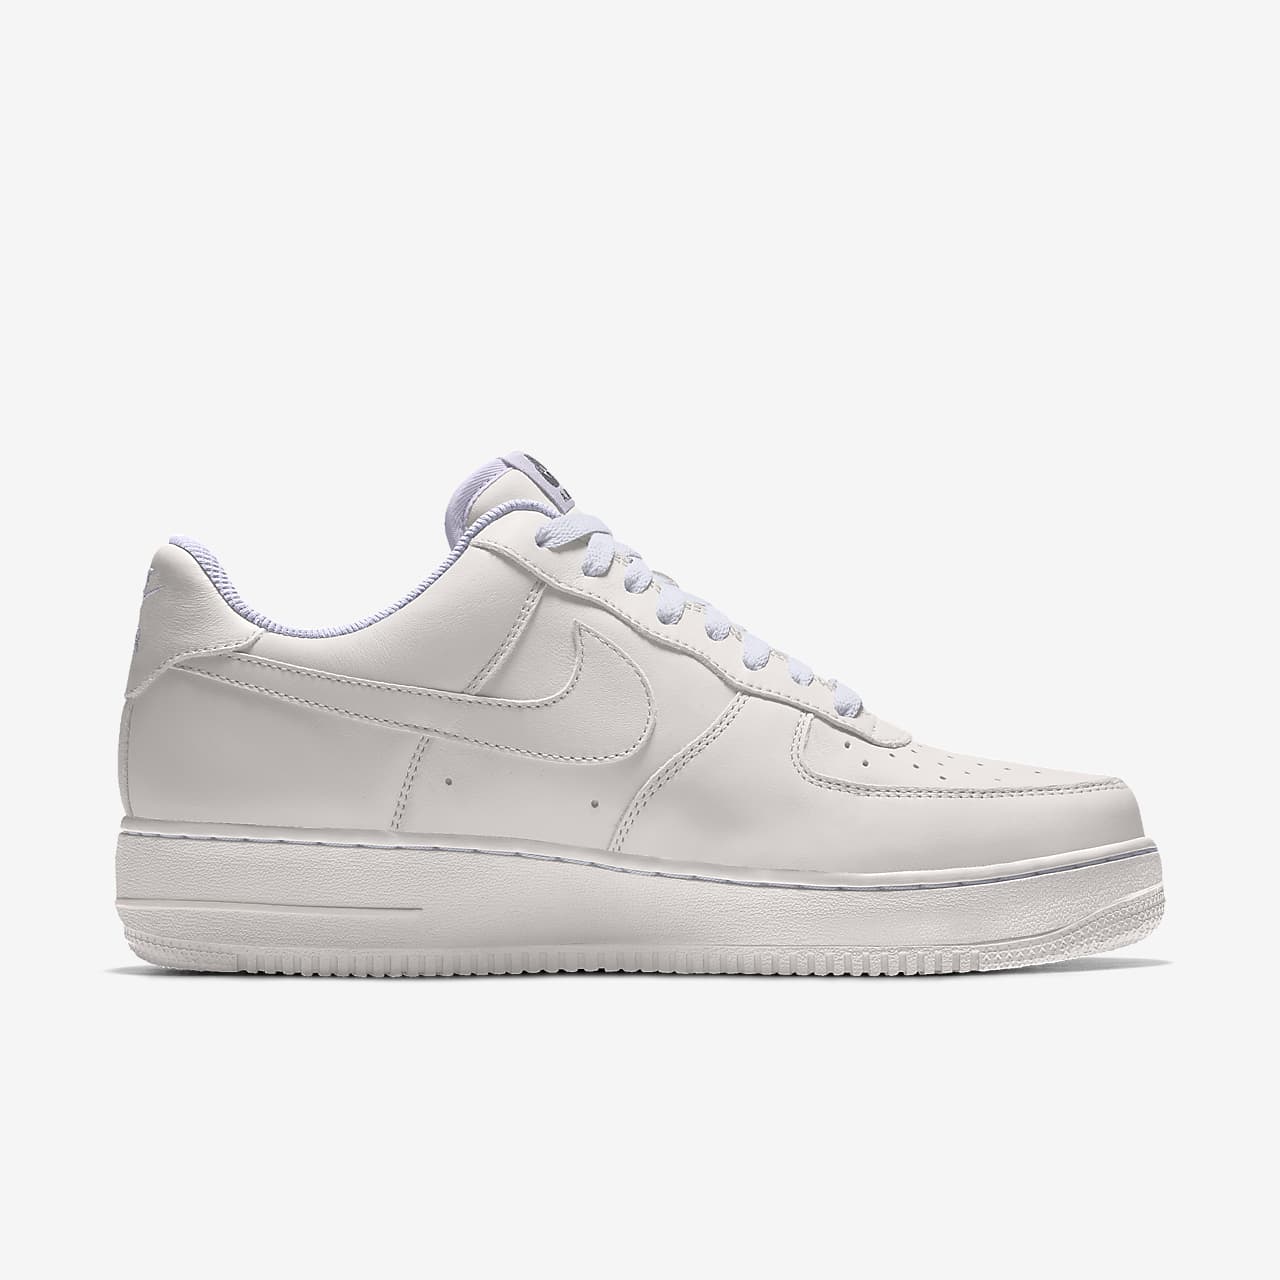 nike air force ripple leather